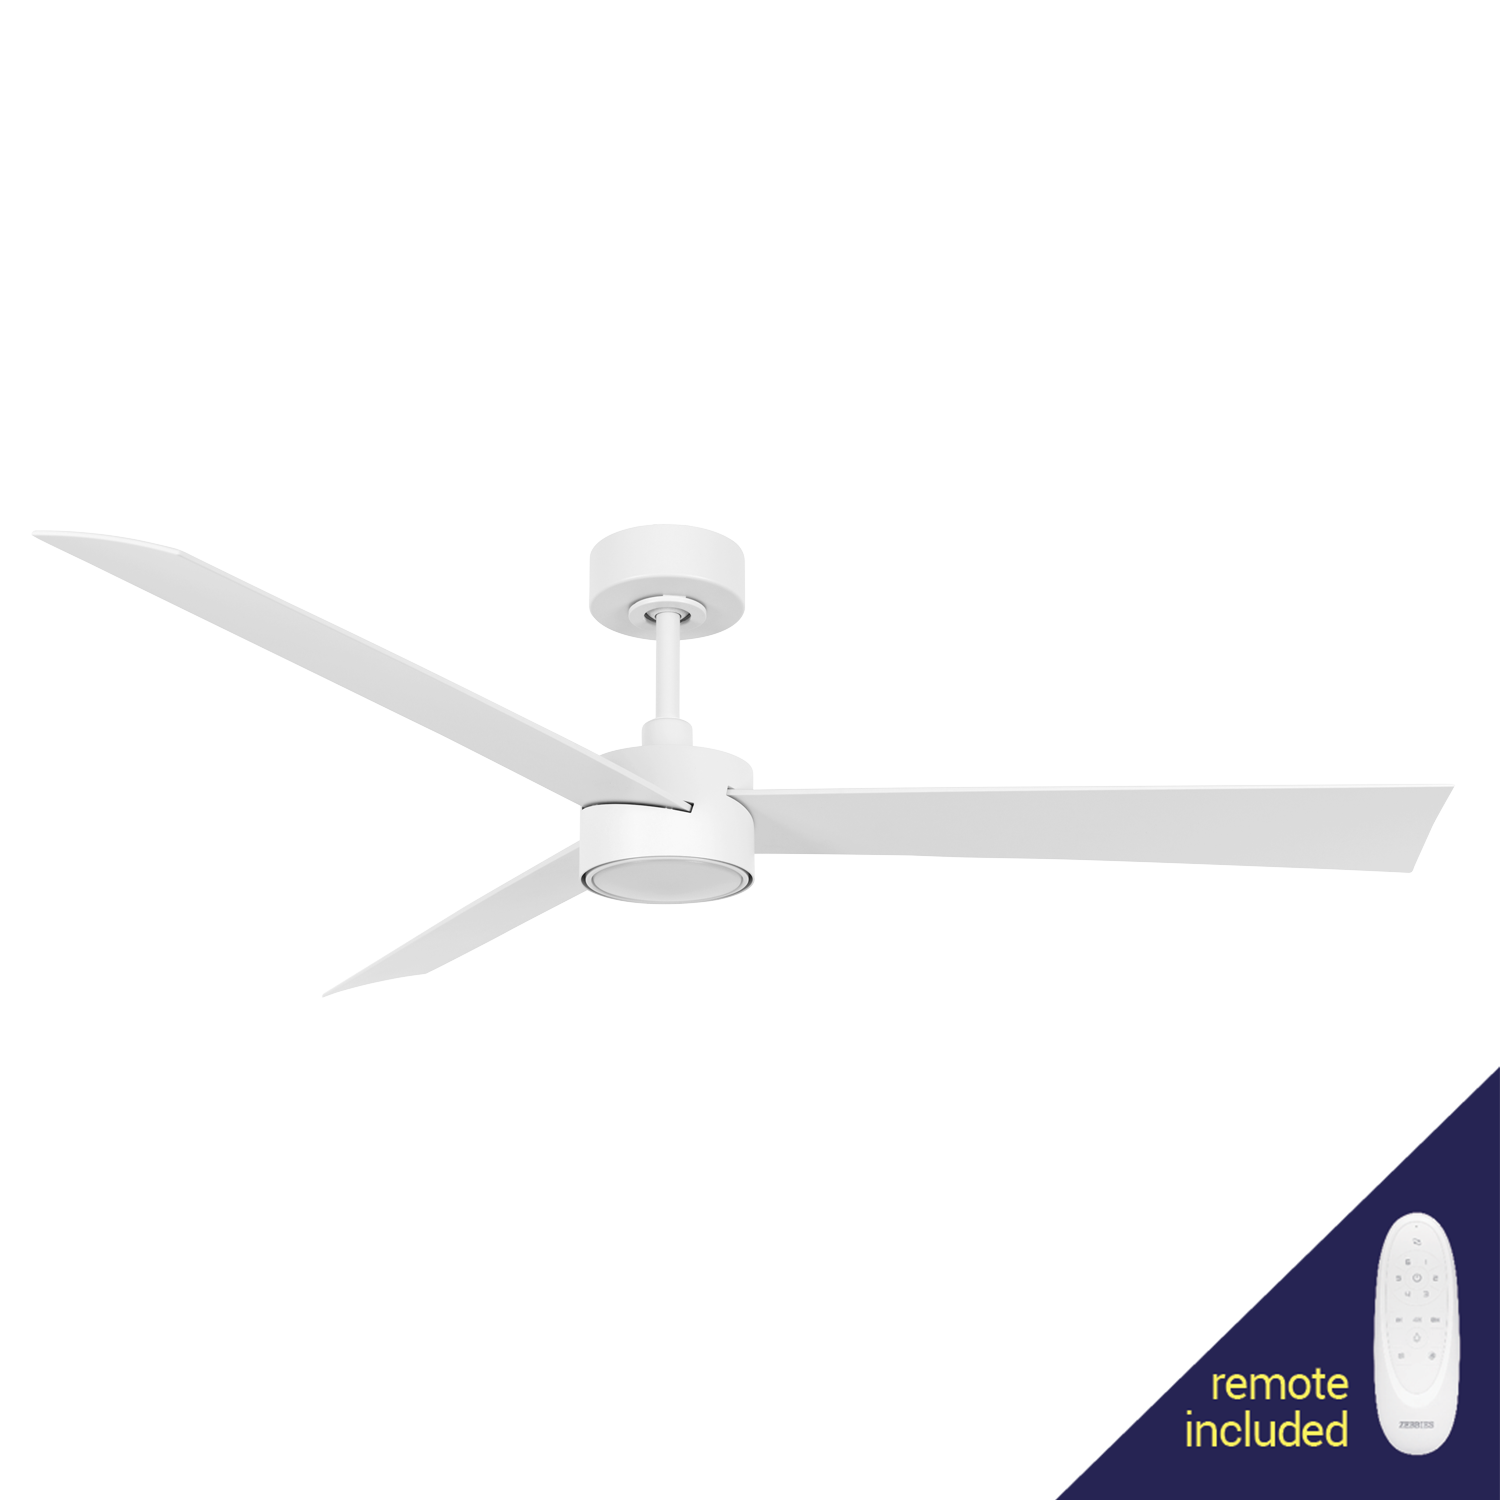 Francolin 2.0 White DC Ceiling Fan with ABS Blades and Removable Light